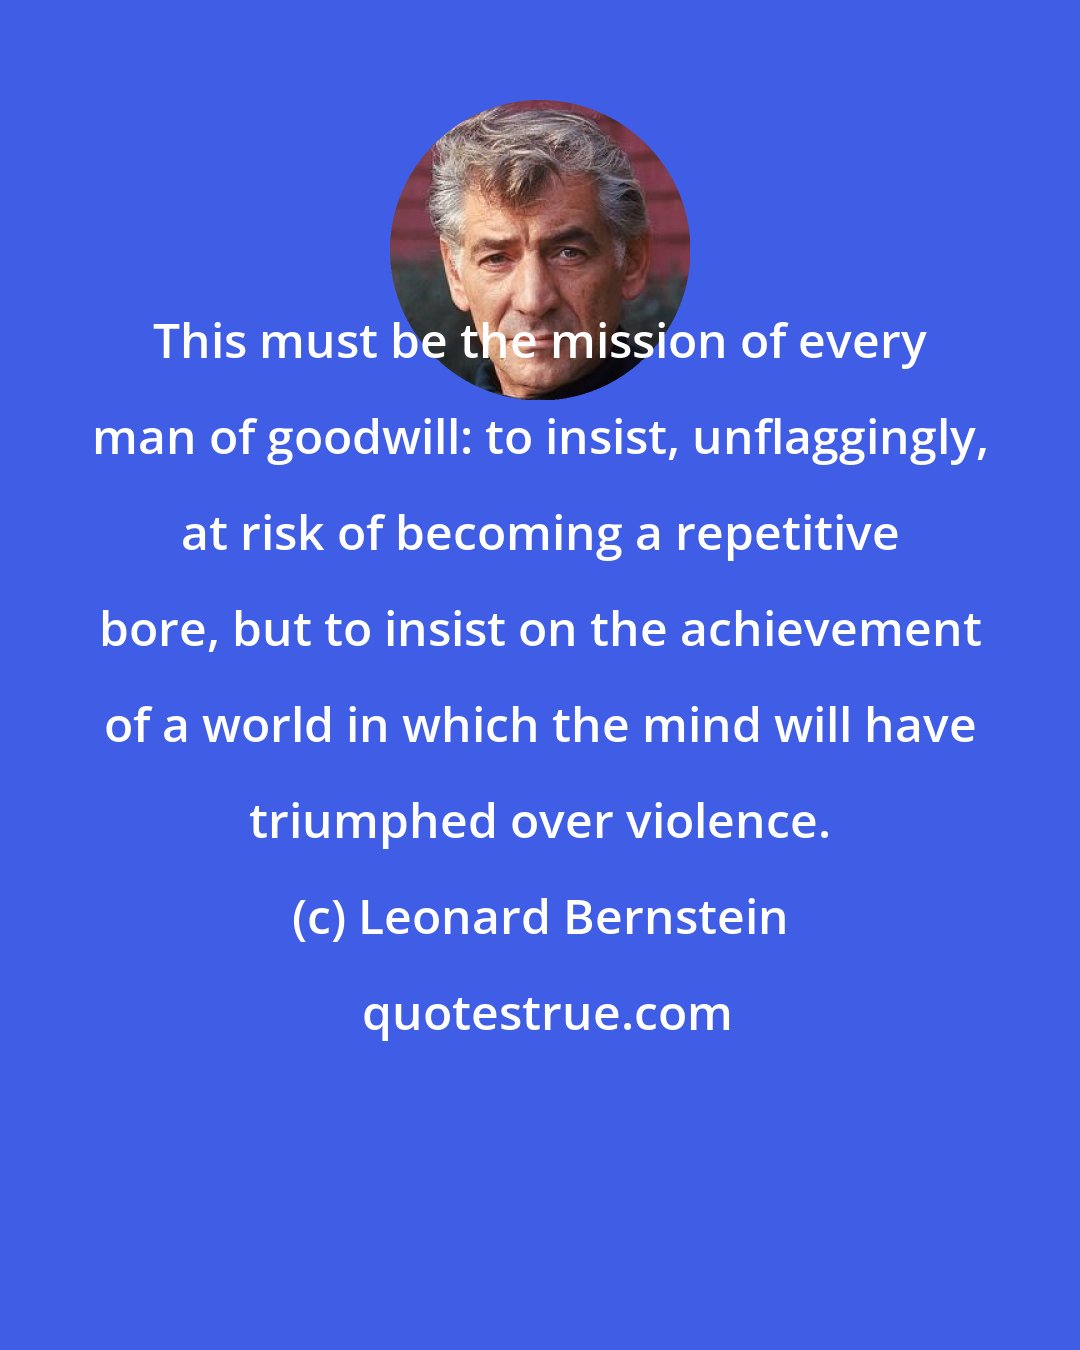 Leonard Bernstein: This must be the mission of every man of goodwill: to insist, unflaggingly, at risk of becoming a repetitive bore, but to insist on the achievement of a world in which the mind will have triumphed over violence.